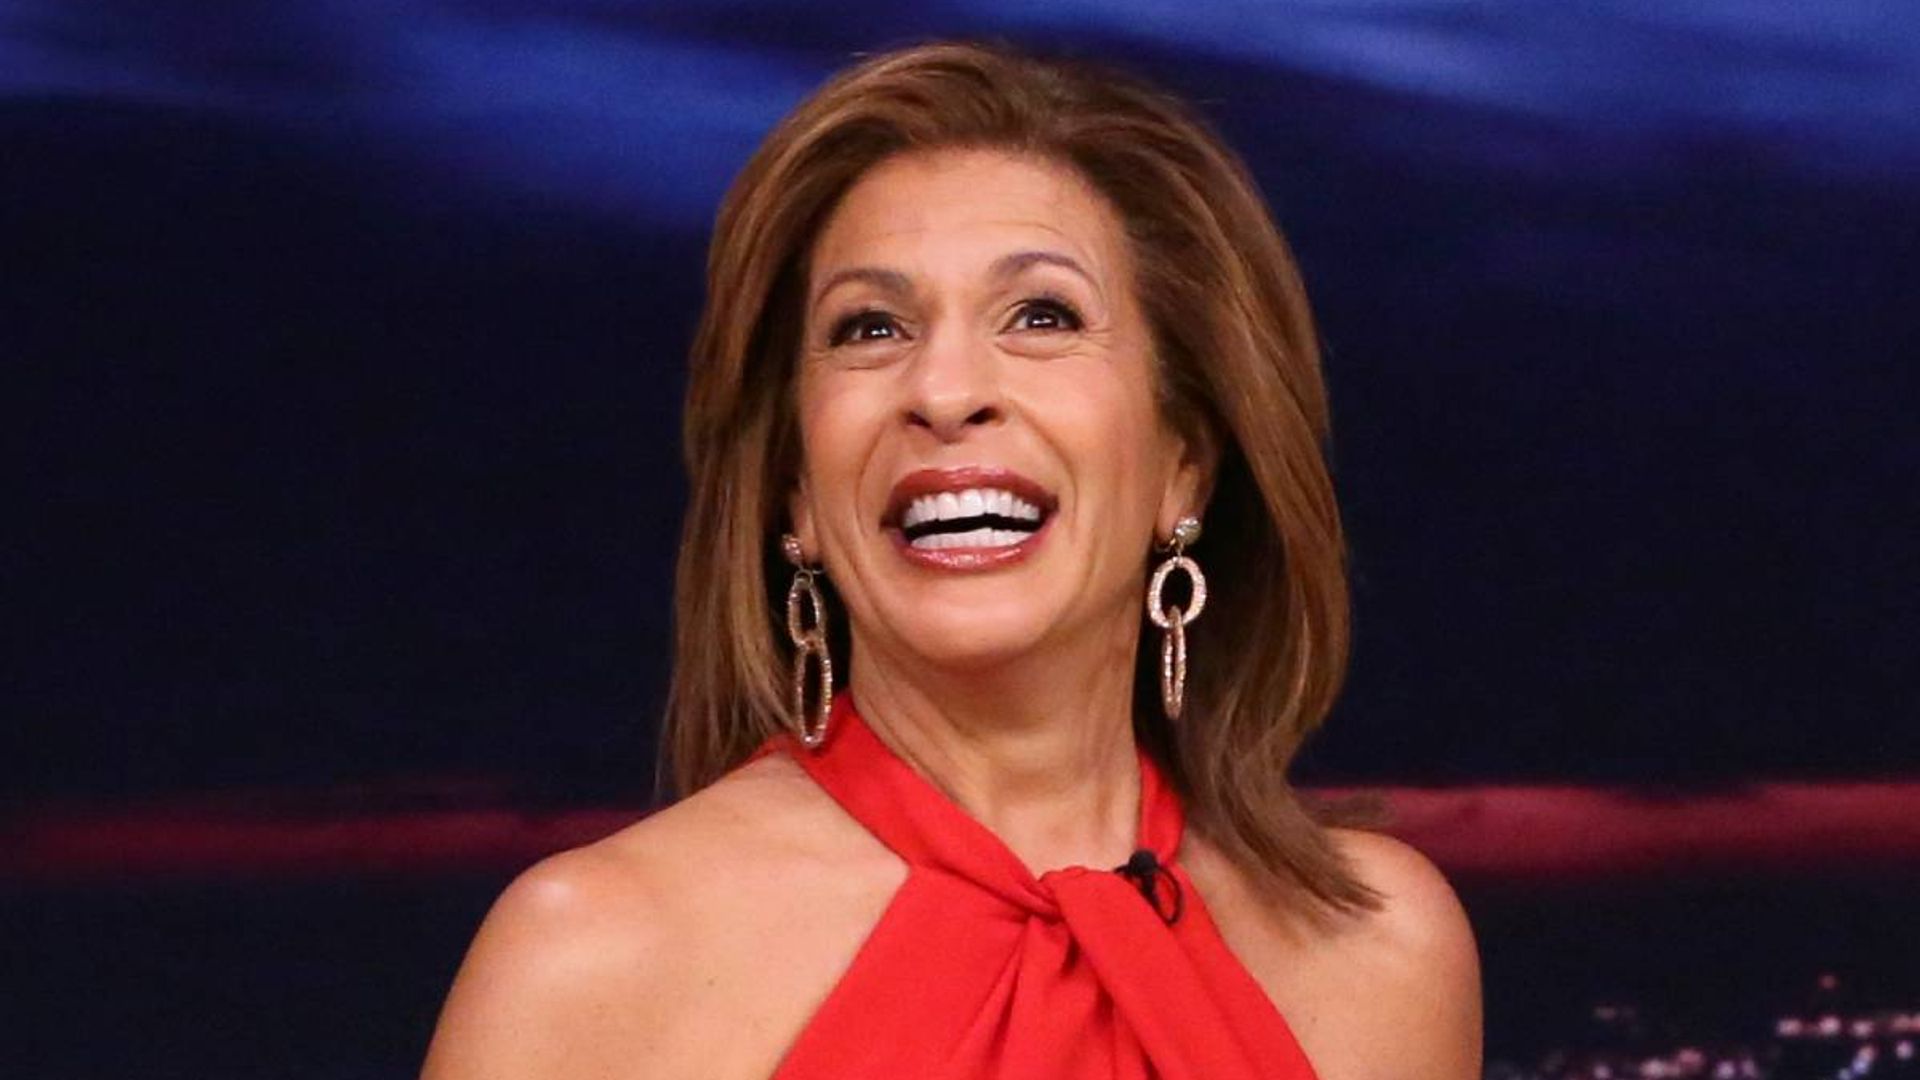 Hoda Kotb inspires Kim Kardashian with her parenting style during much-anticipated interview